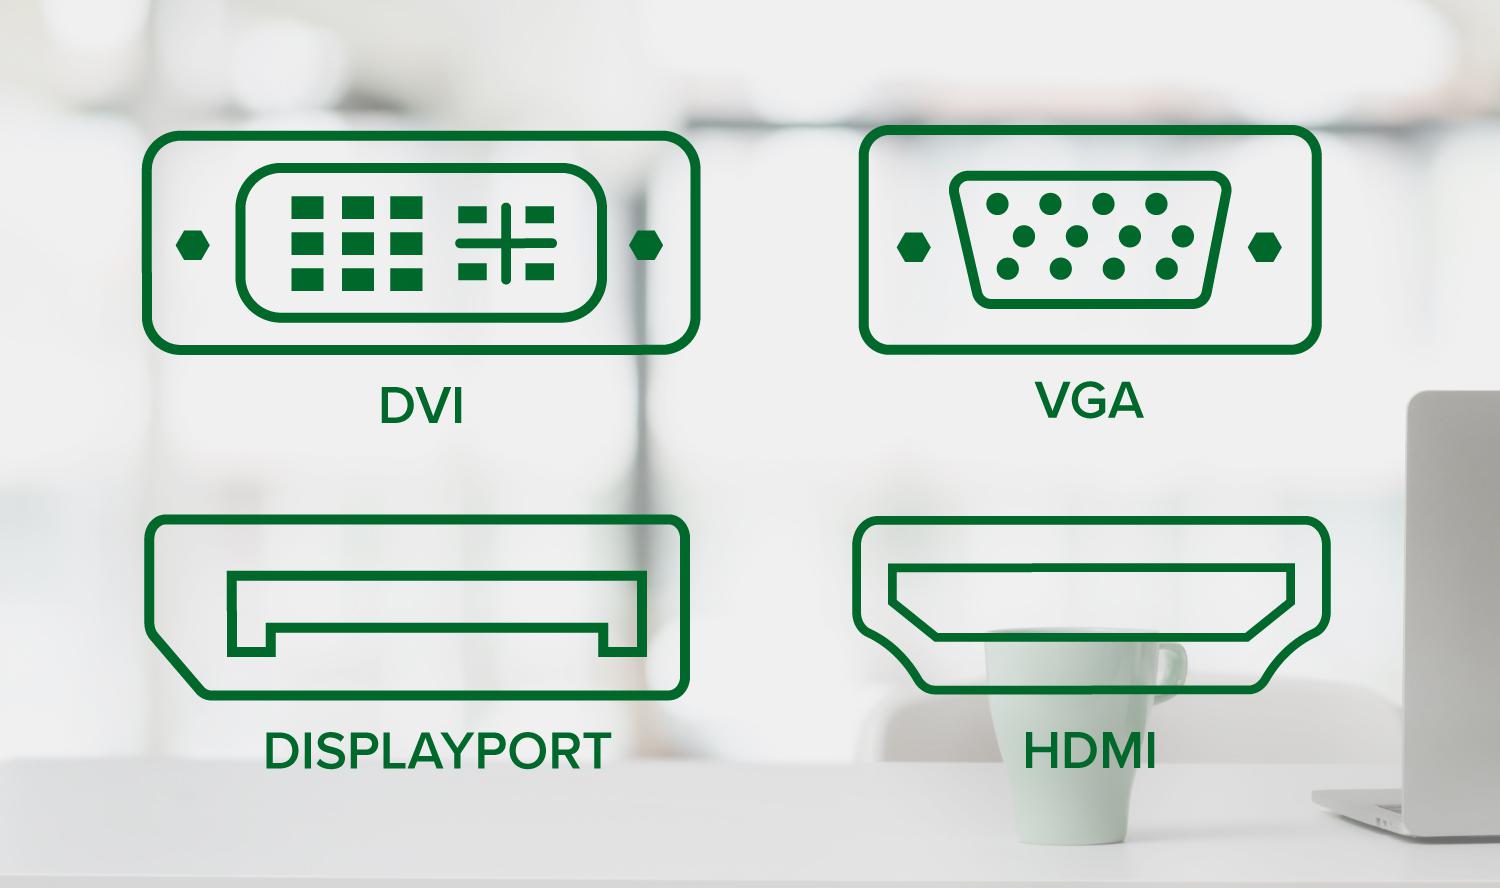 Symbols for four common video ports